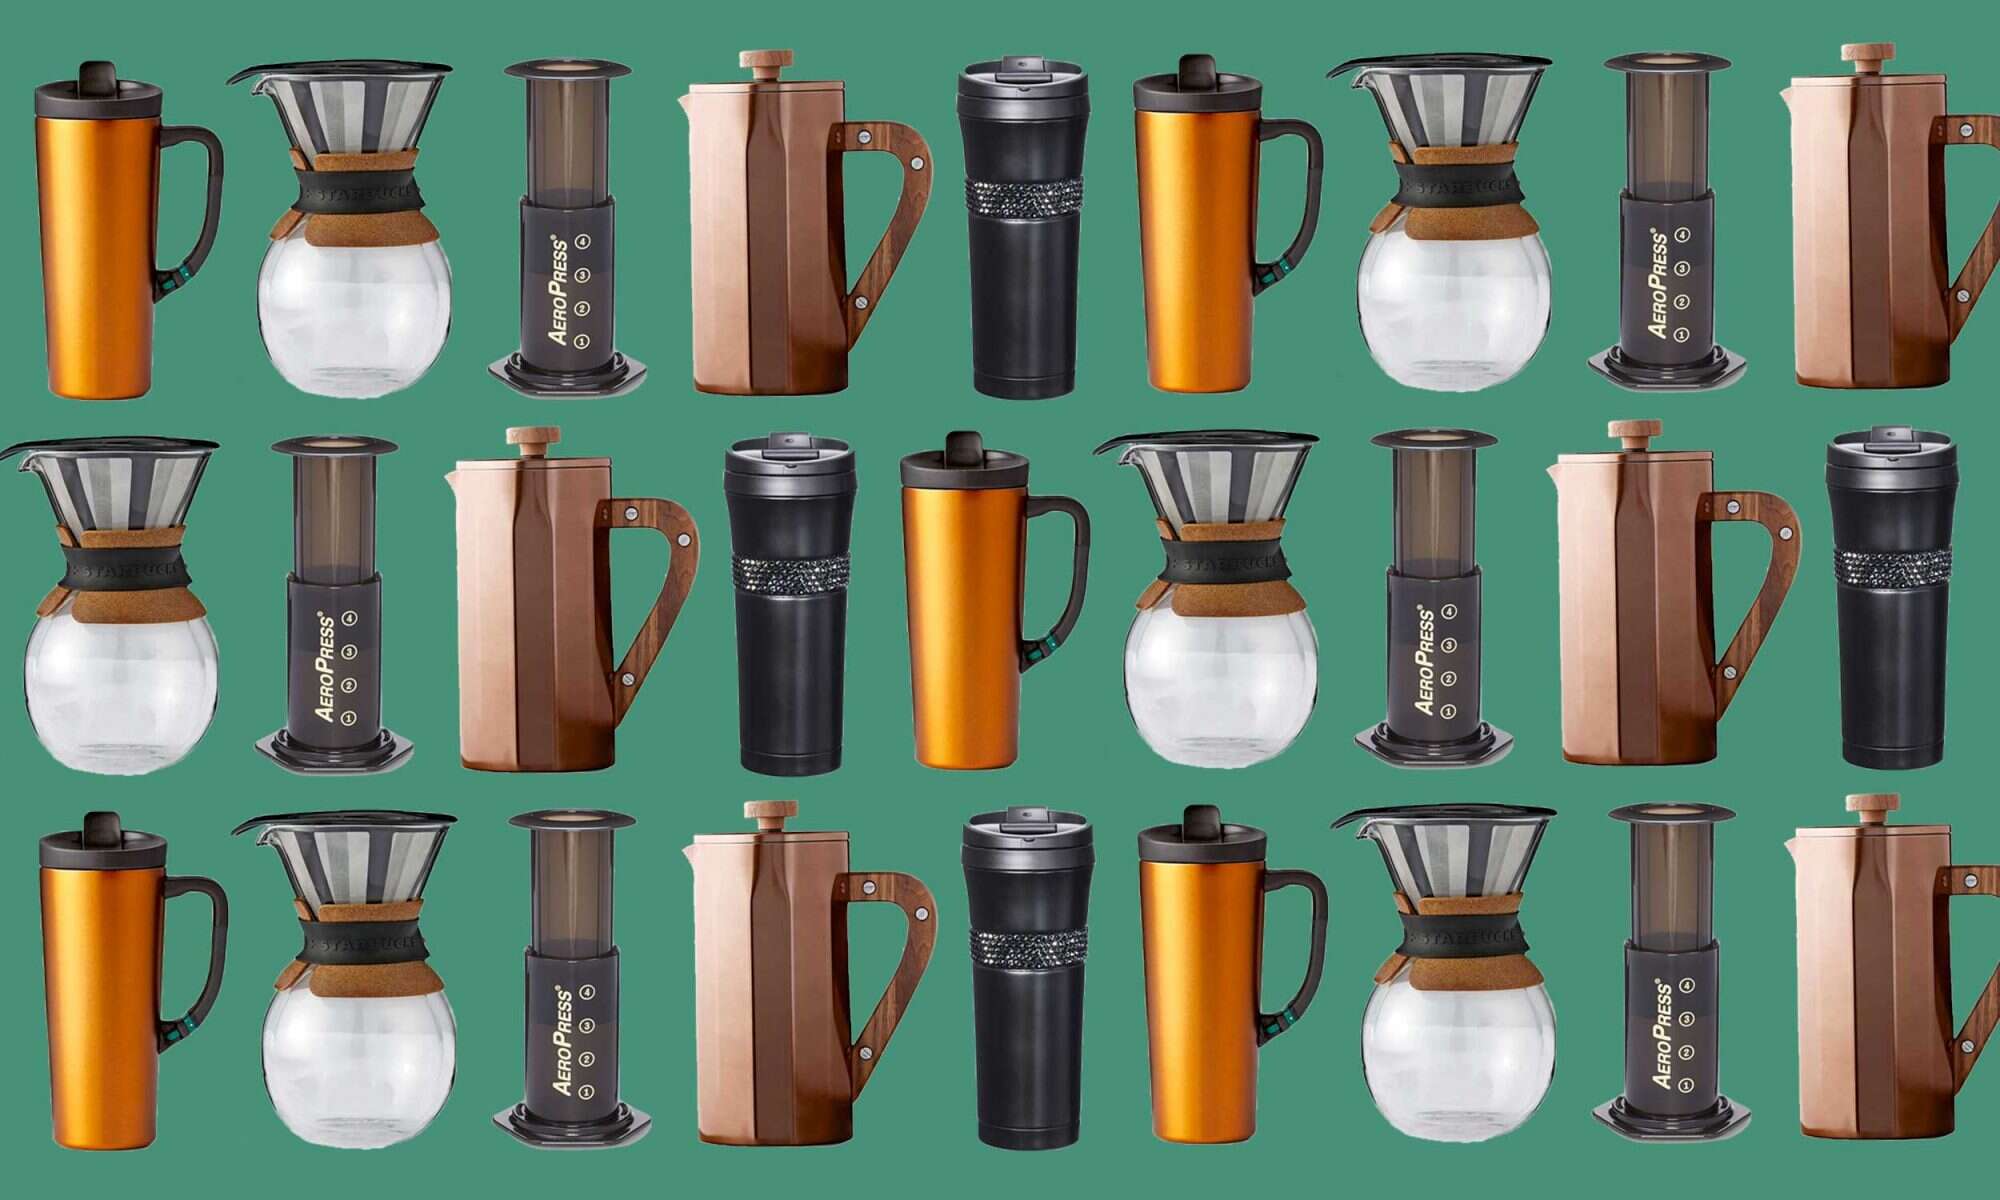 STARBUCKS COFFEE MAKING ACCESSORIES Sold As Set